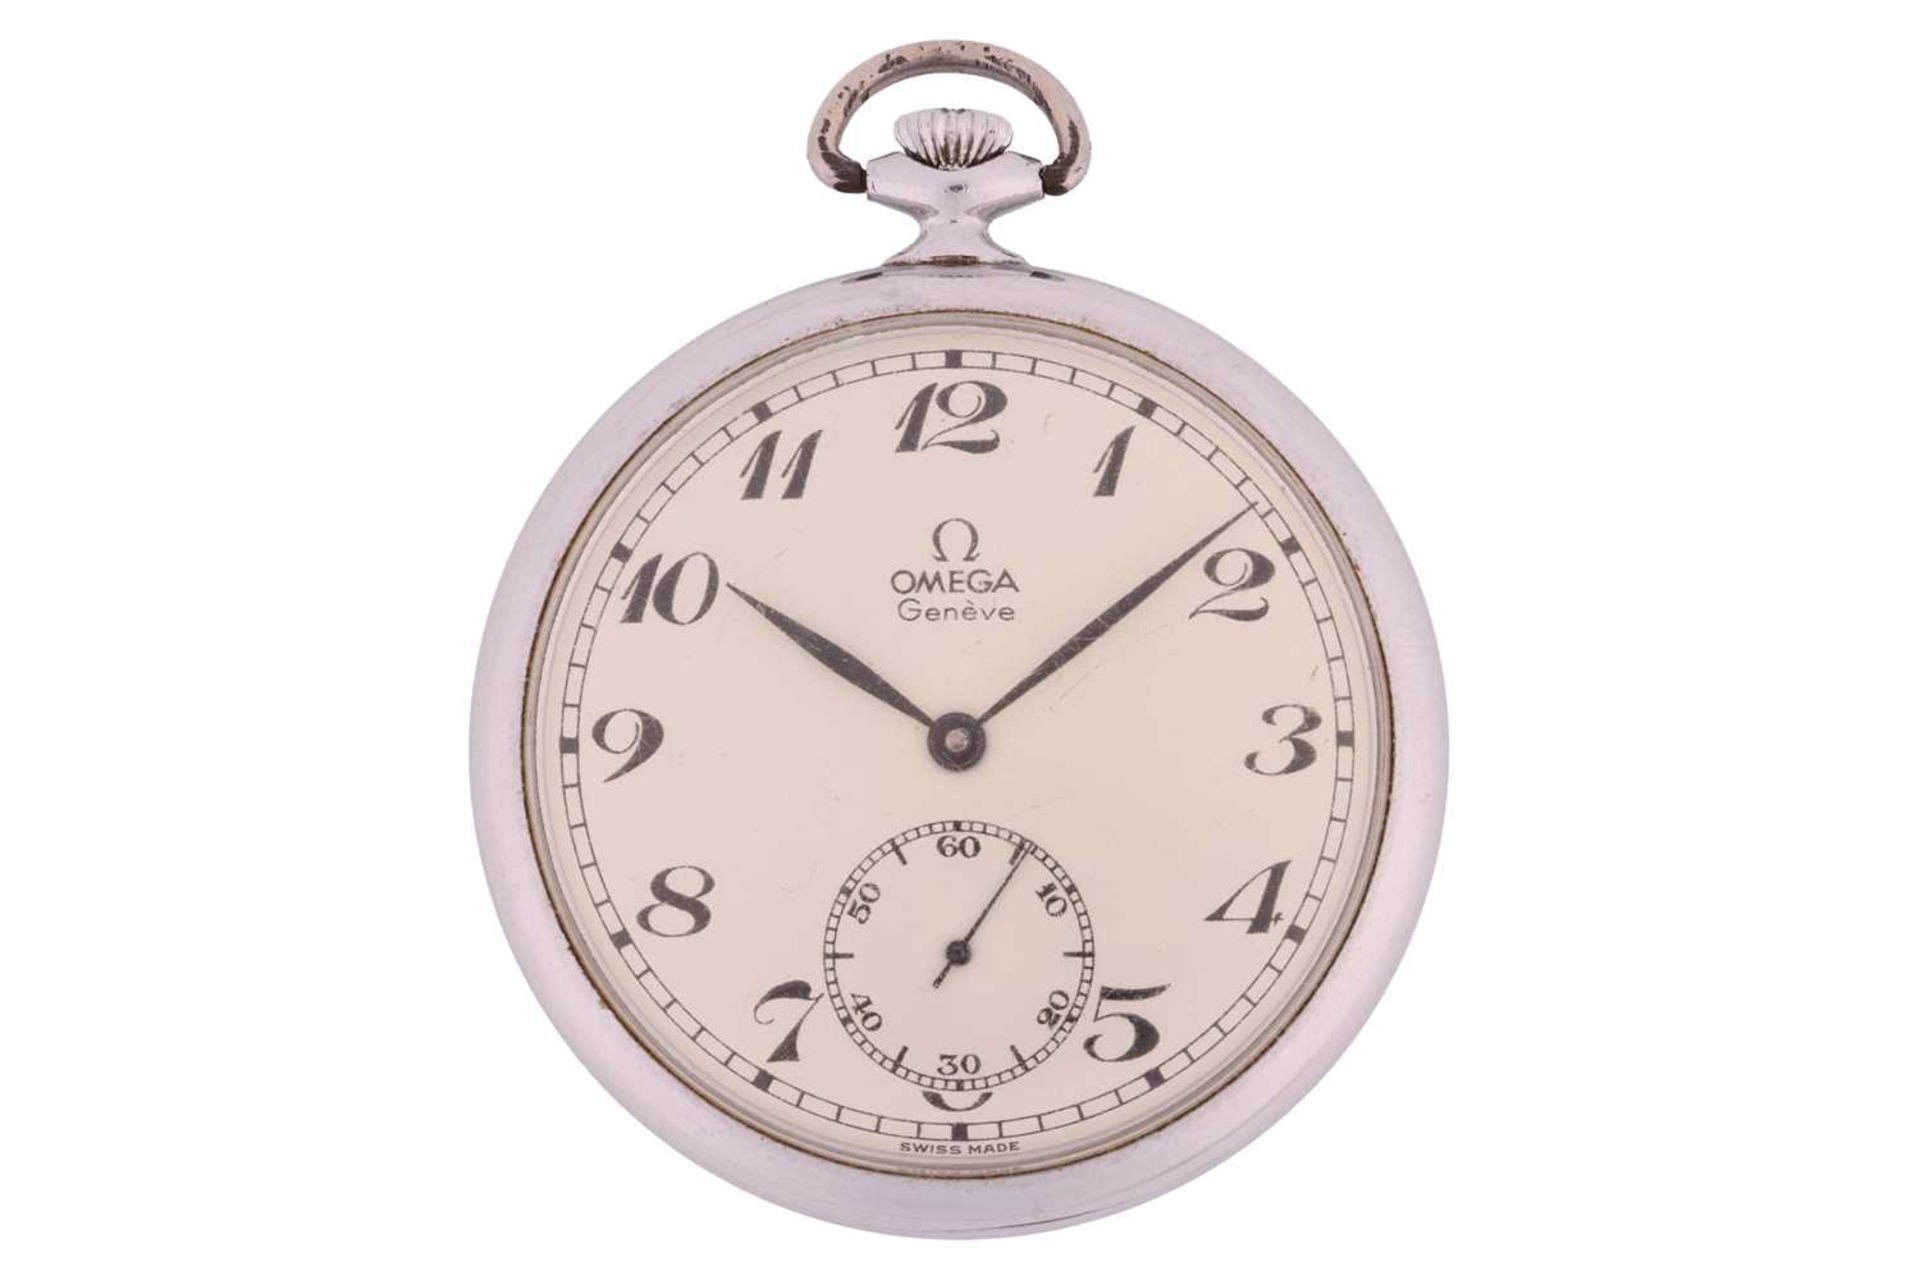 An Omega open-face pocket watch, featuring a keyless wound movement calibre 960 in a steel case